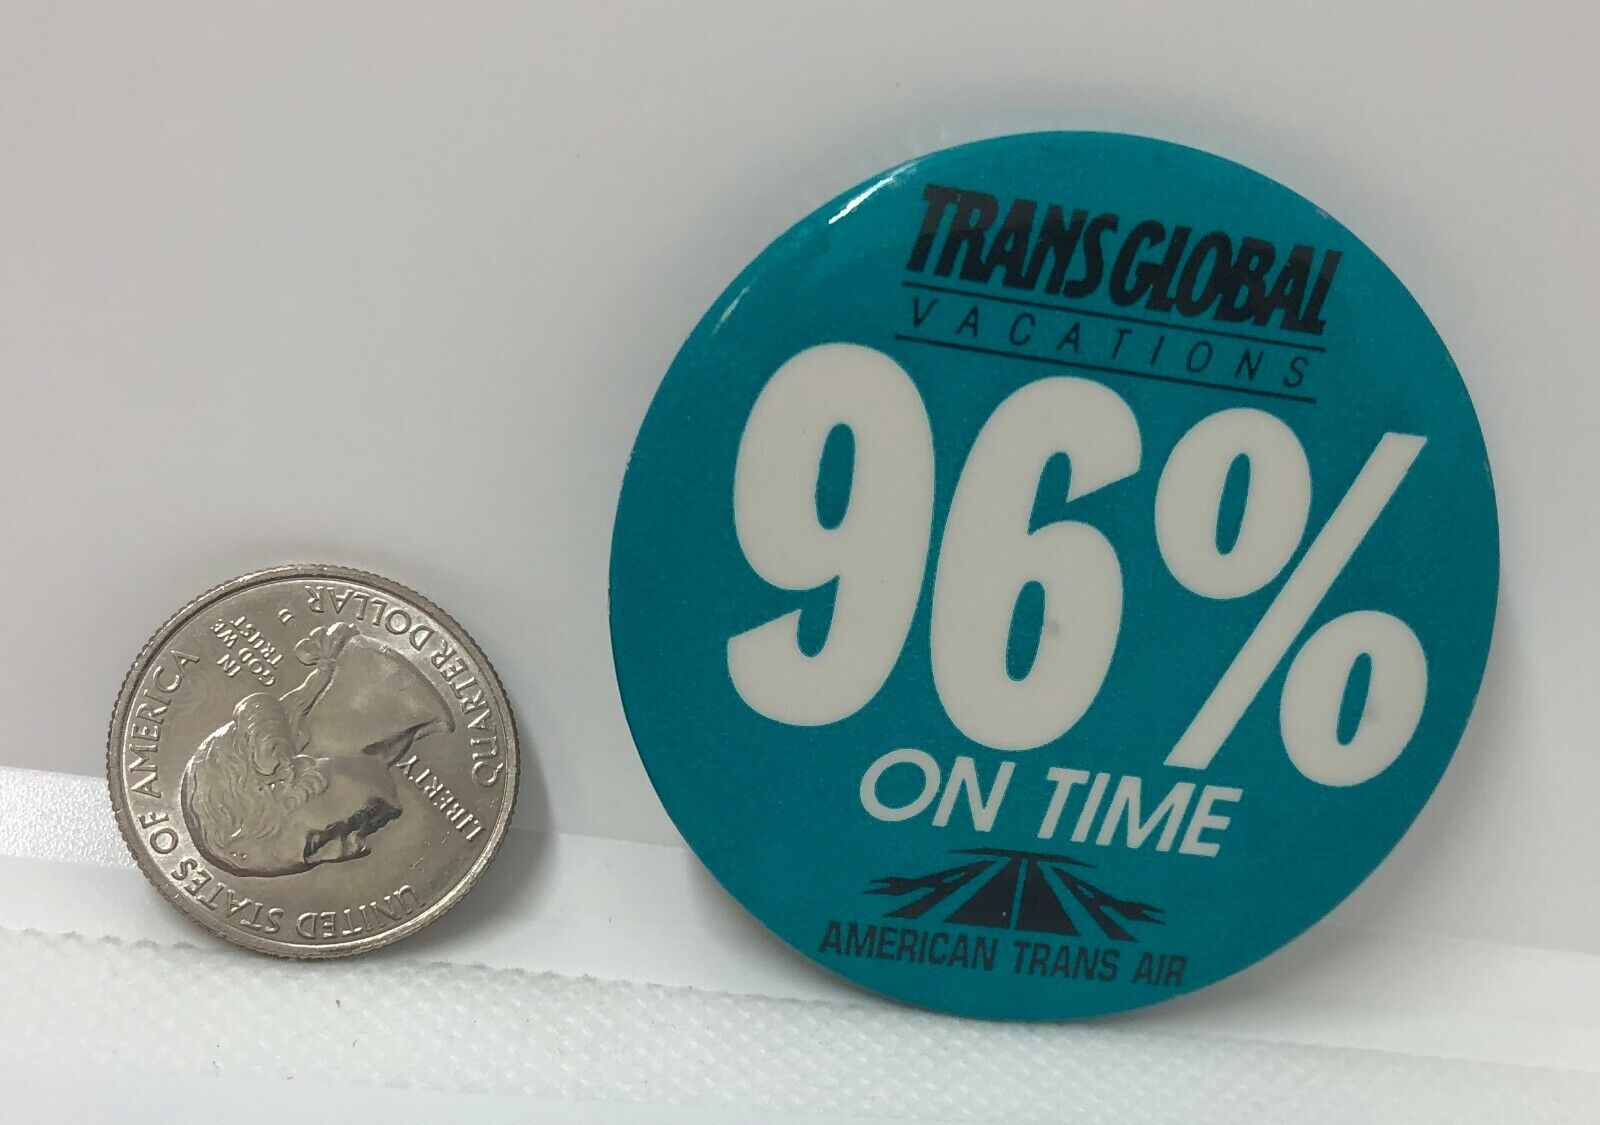 Trans Global Vacations 96% On Time American Trans Air Advertising Pin